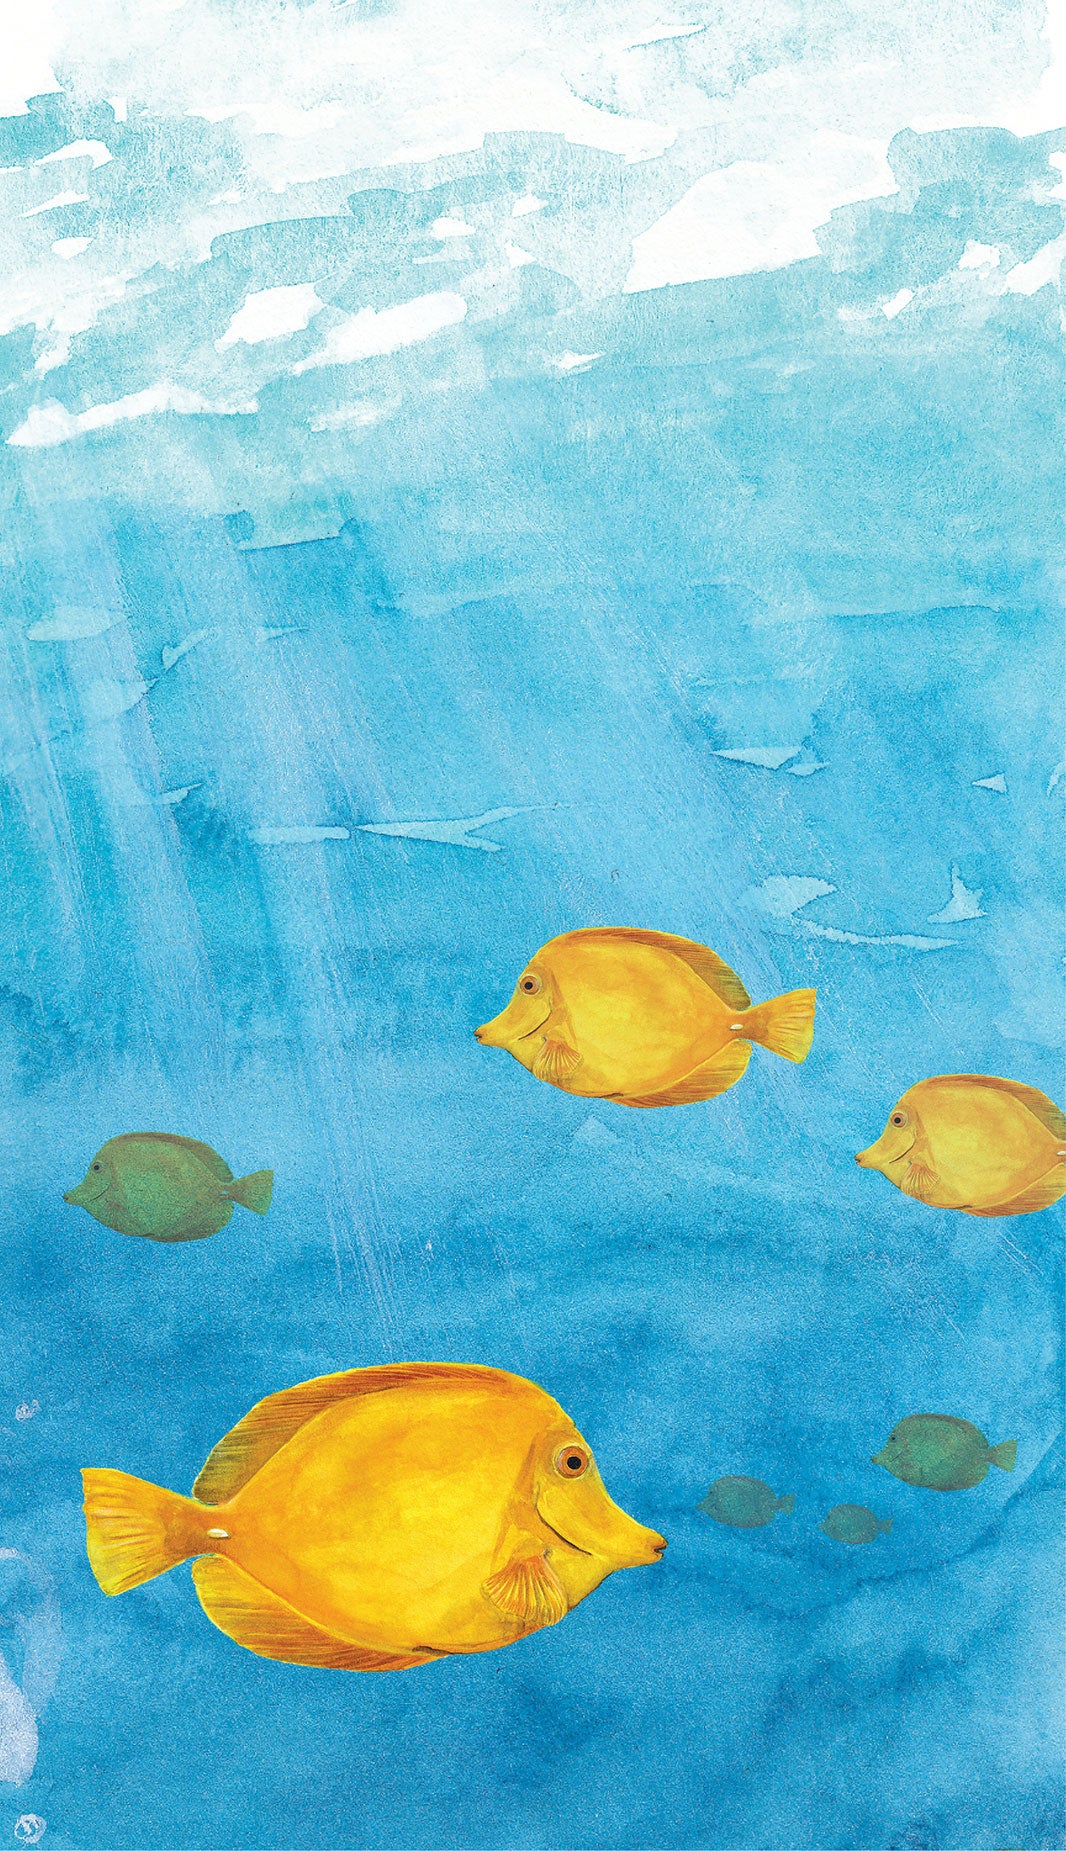 Illustration of yellow tangs. Light shining down from water surface.